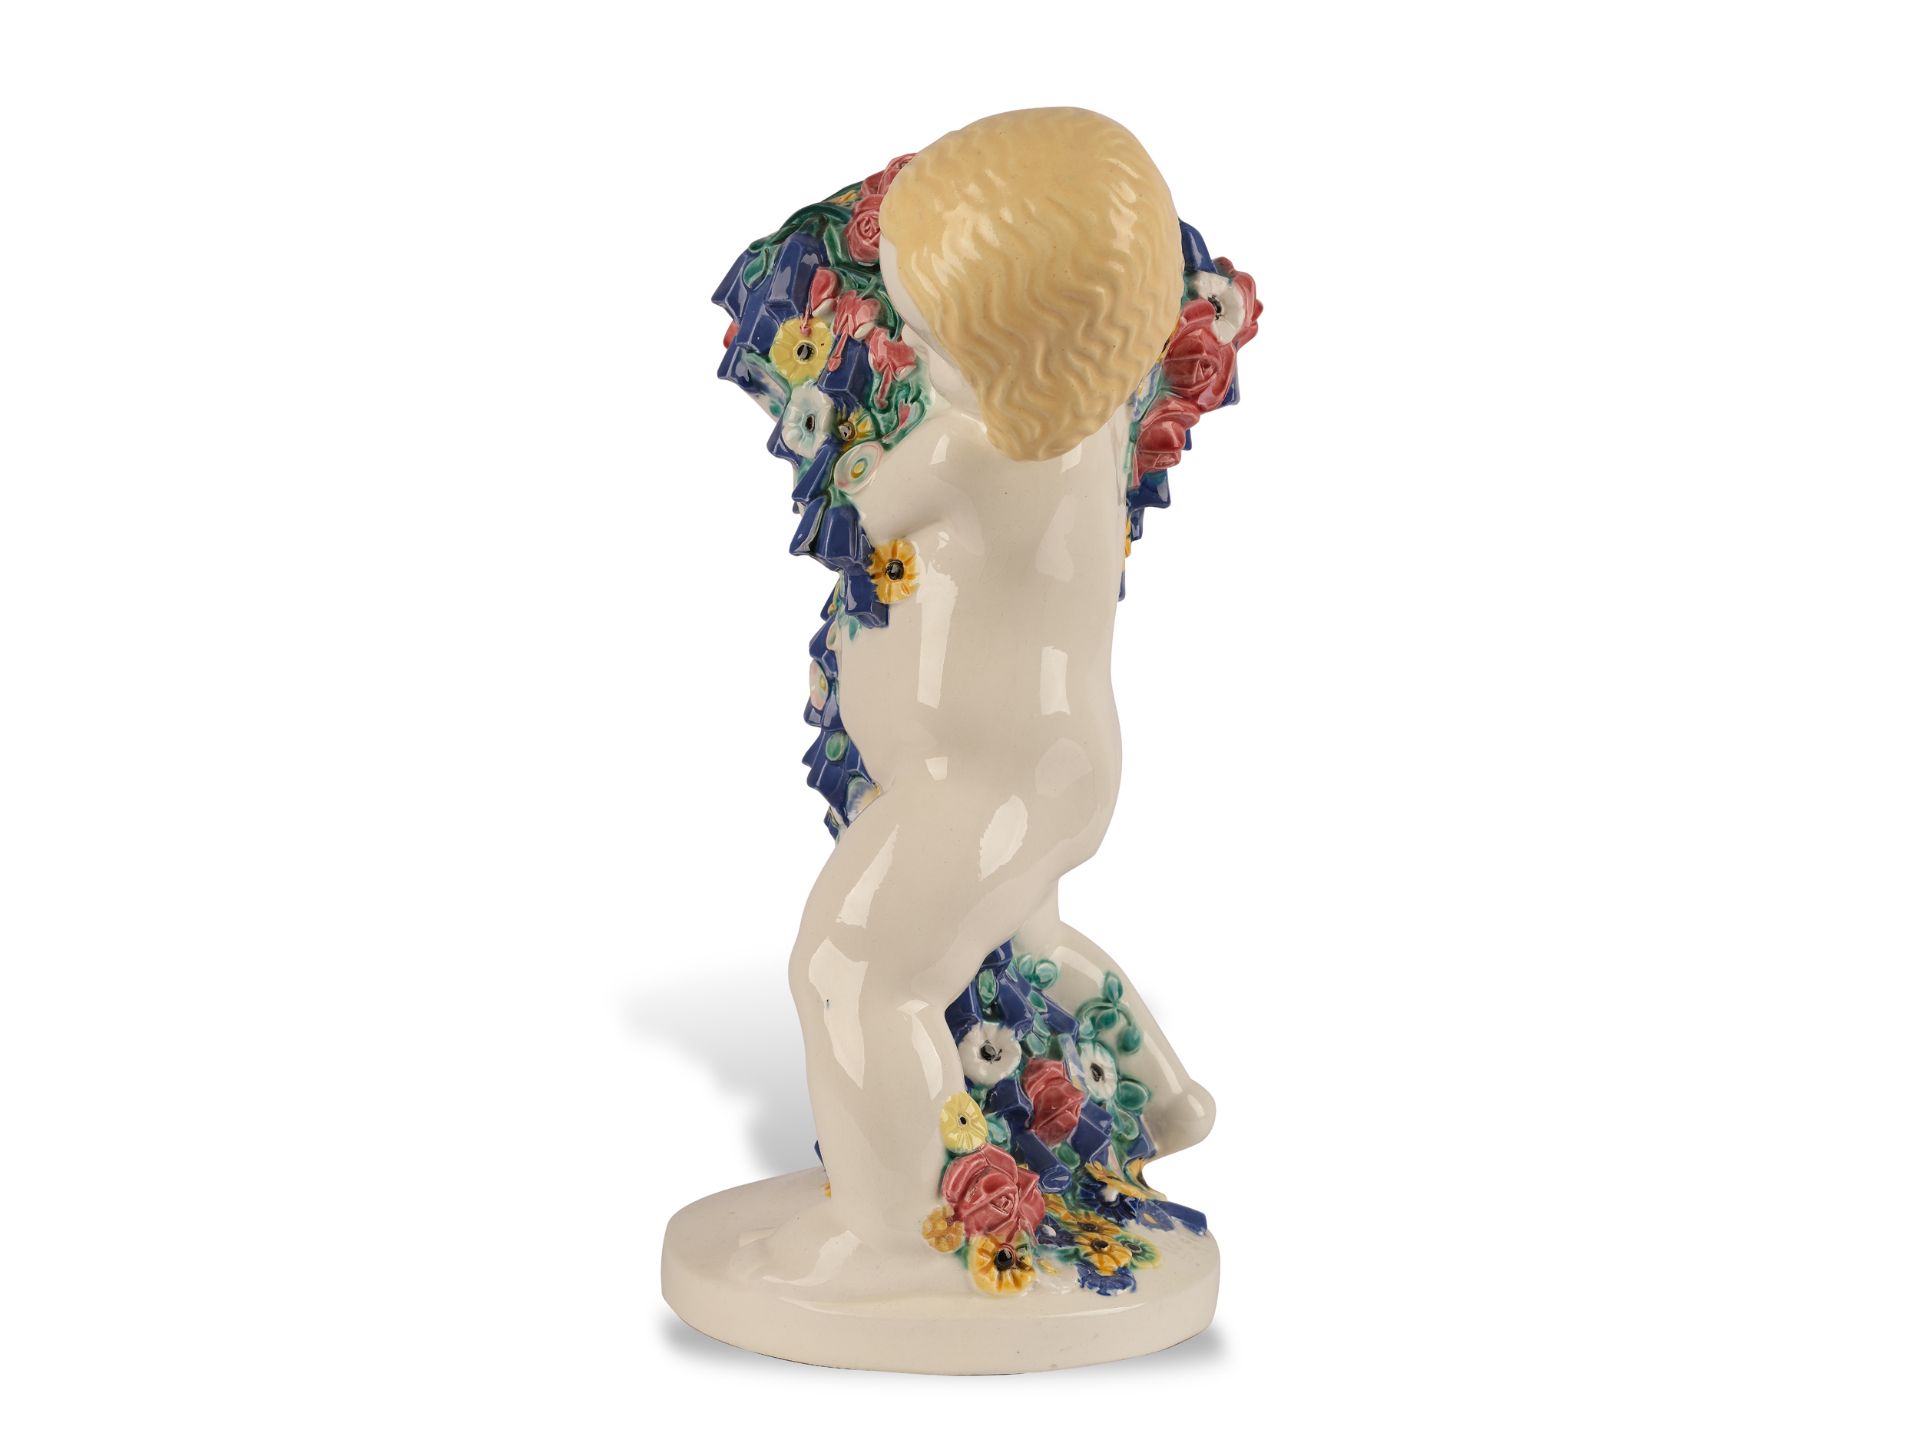 Michael Powolny, Judenburg 1871 - 1954 Vienna, Muse putto with flowers "Spring - Image 2 of 5